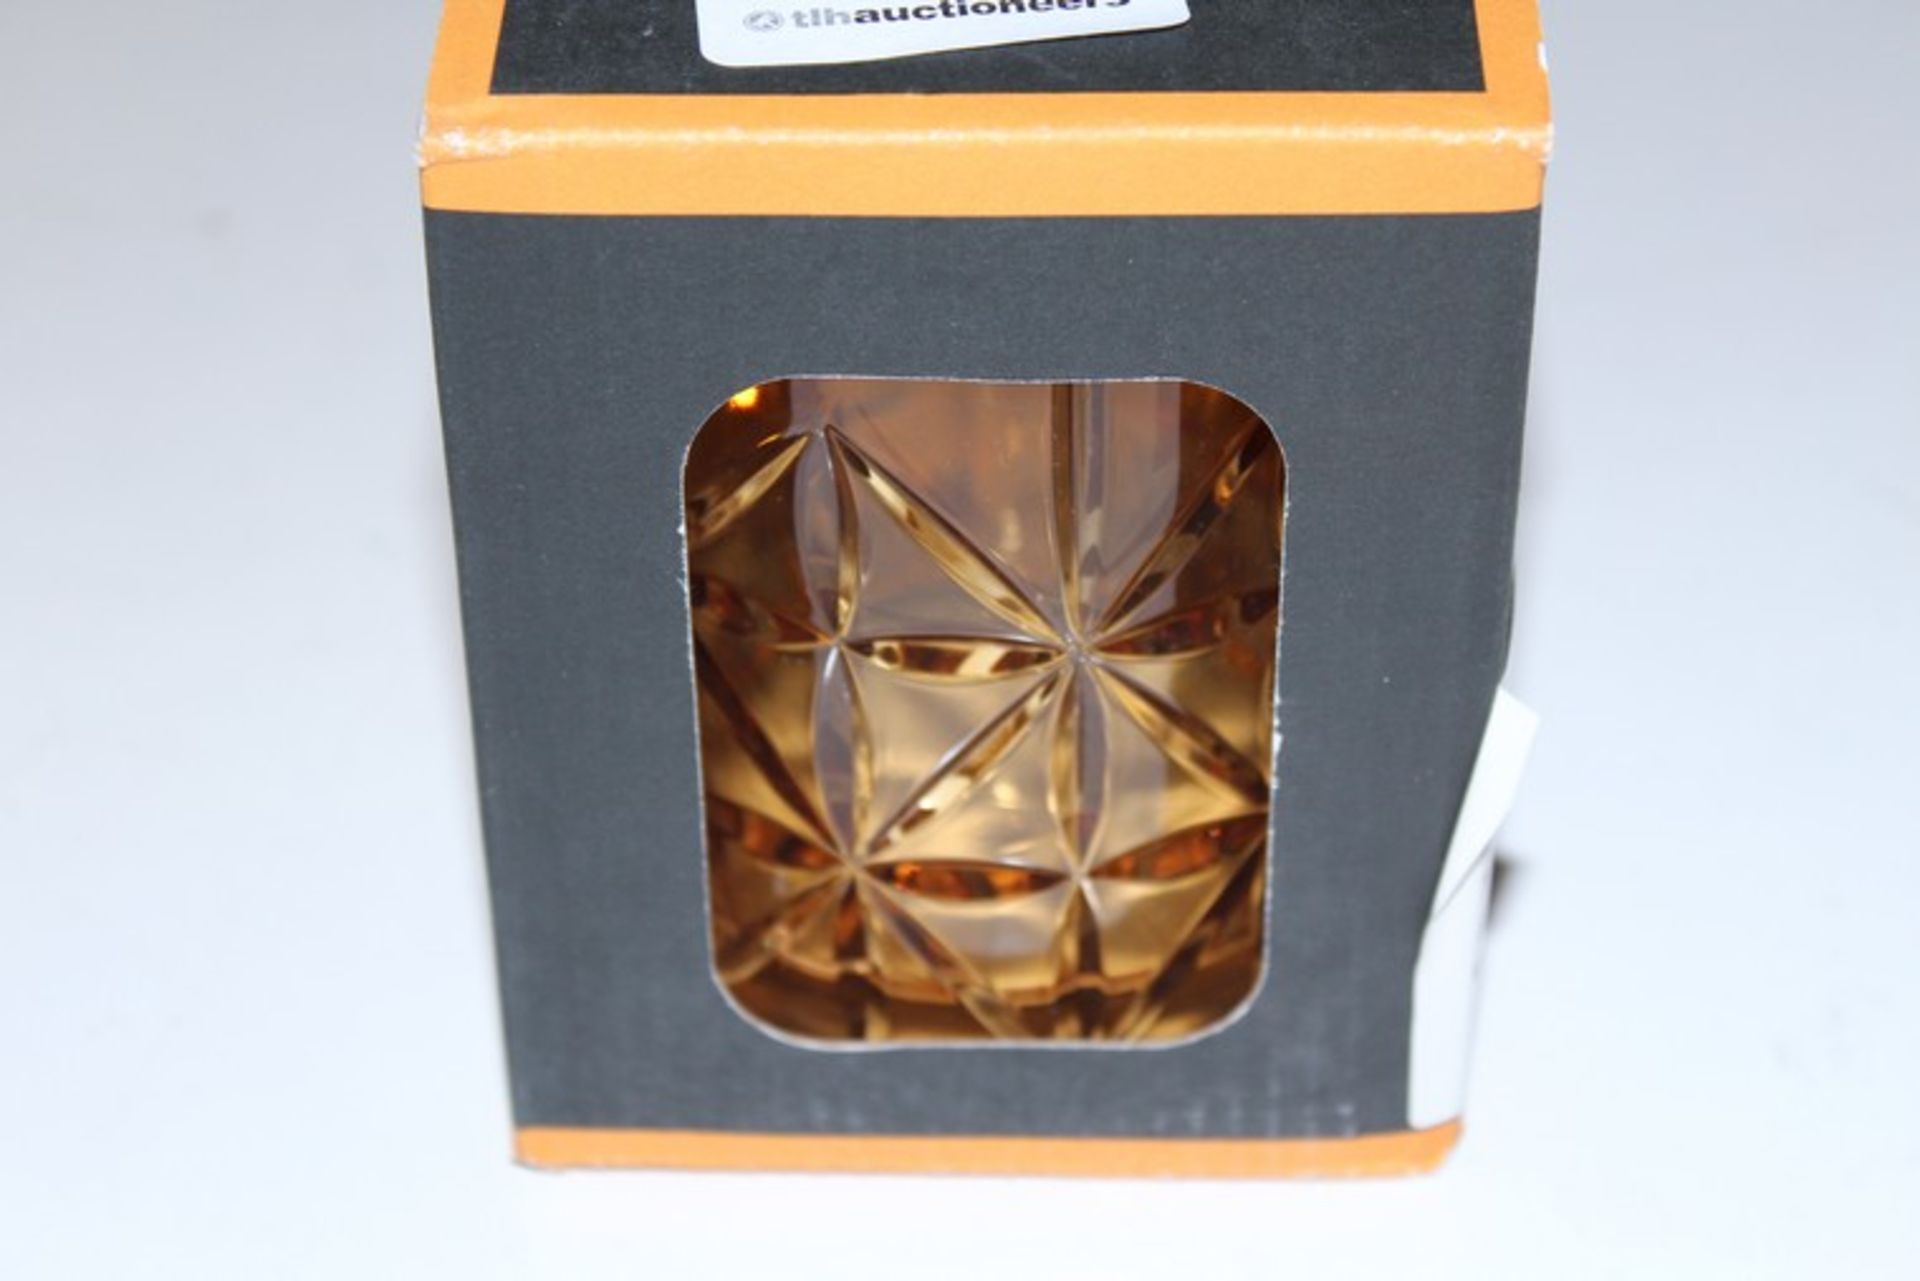 3 x BOXED BRAND NEW WISKY GLASSES IN ORANGE RRP £30 (16/11/17) *PLEASE NOTE THAT THE BID PRICE IS